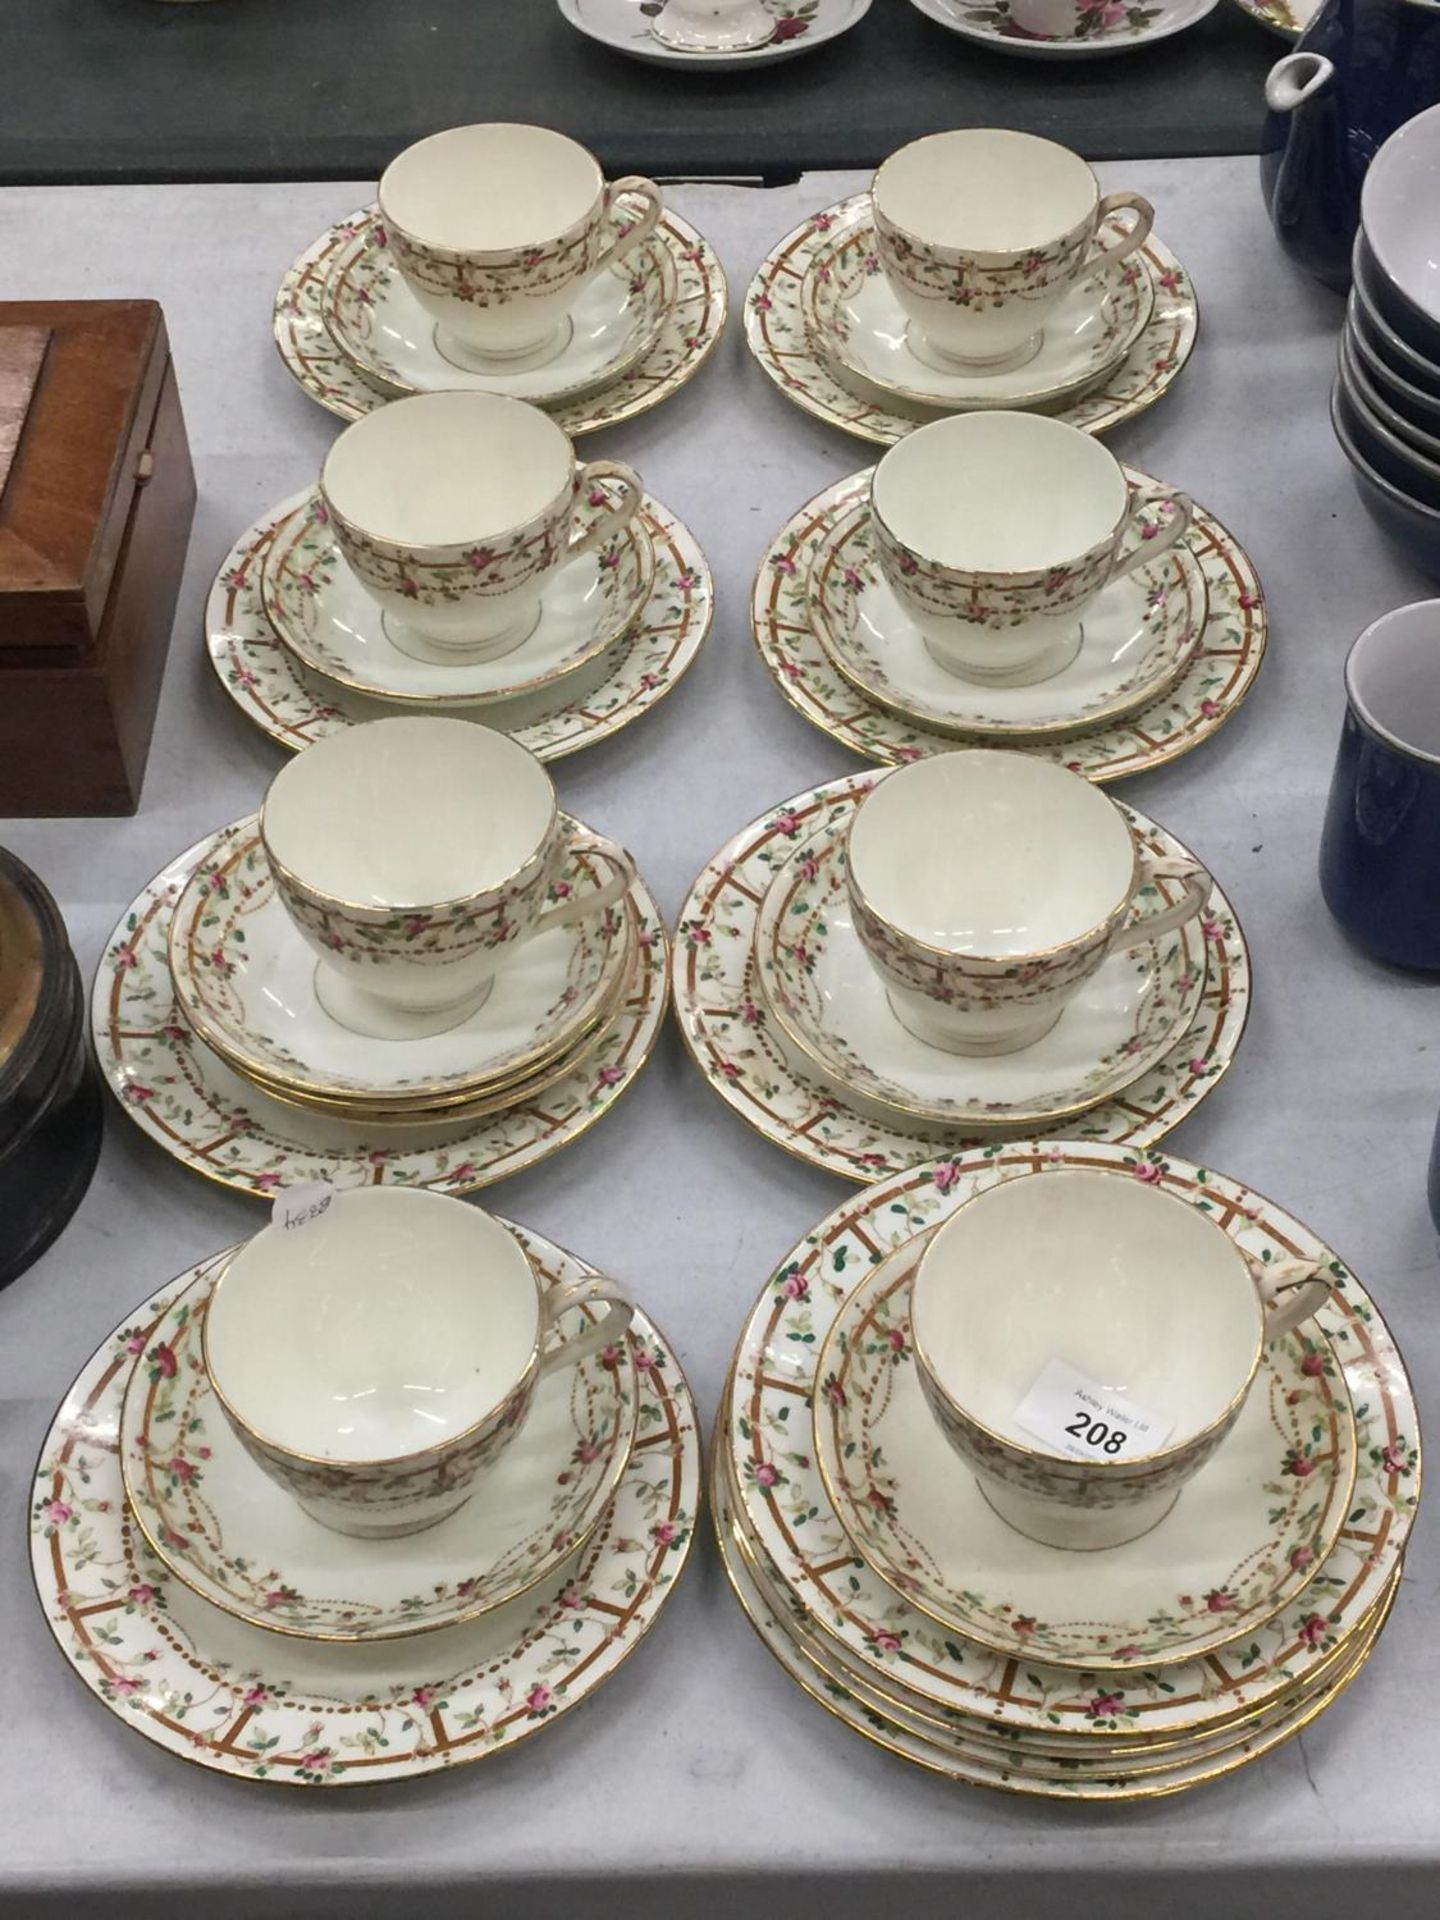 A QUANTITY OF QUEEN'S CHINA CUPS, SAUCERS AND SIDE PLATES